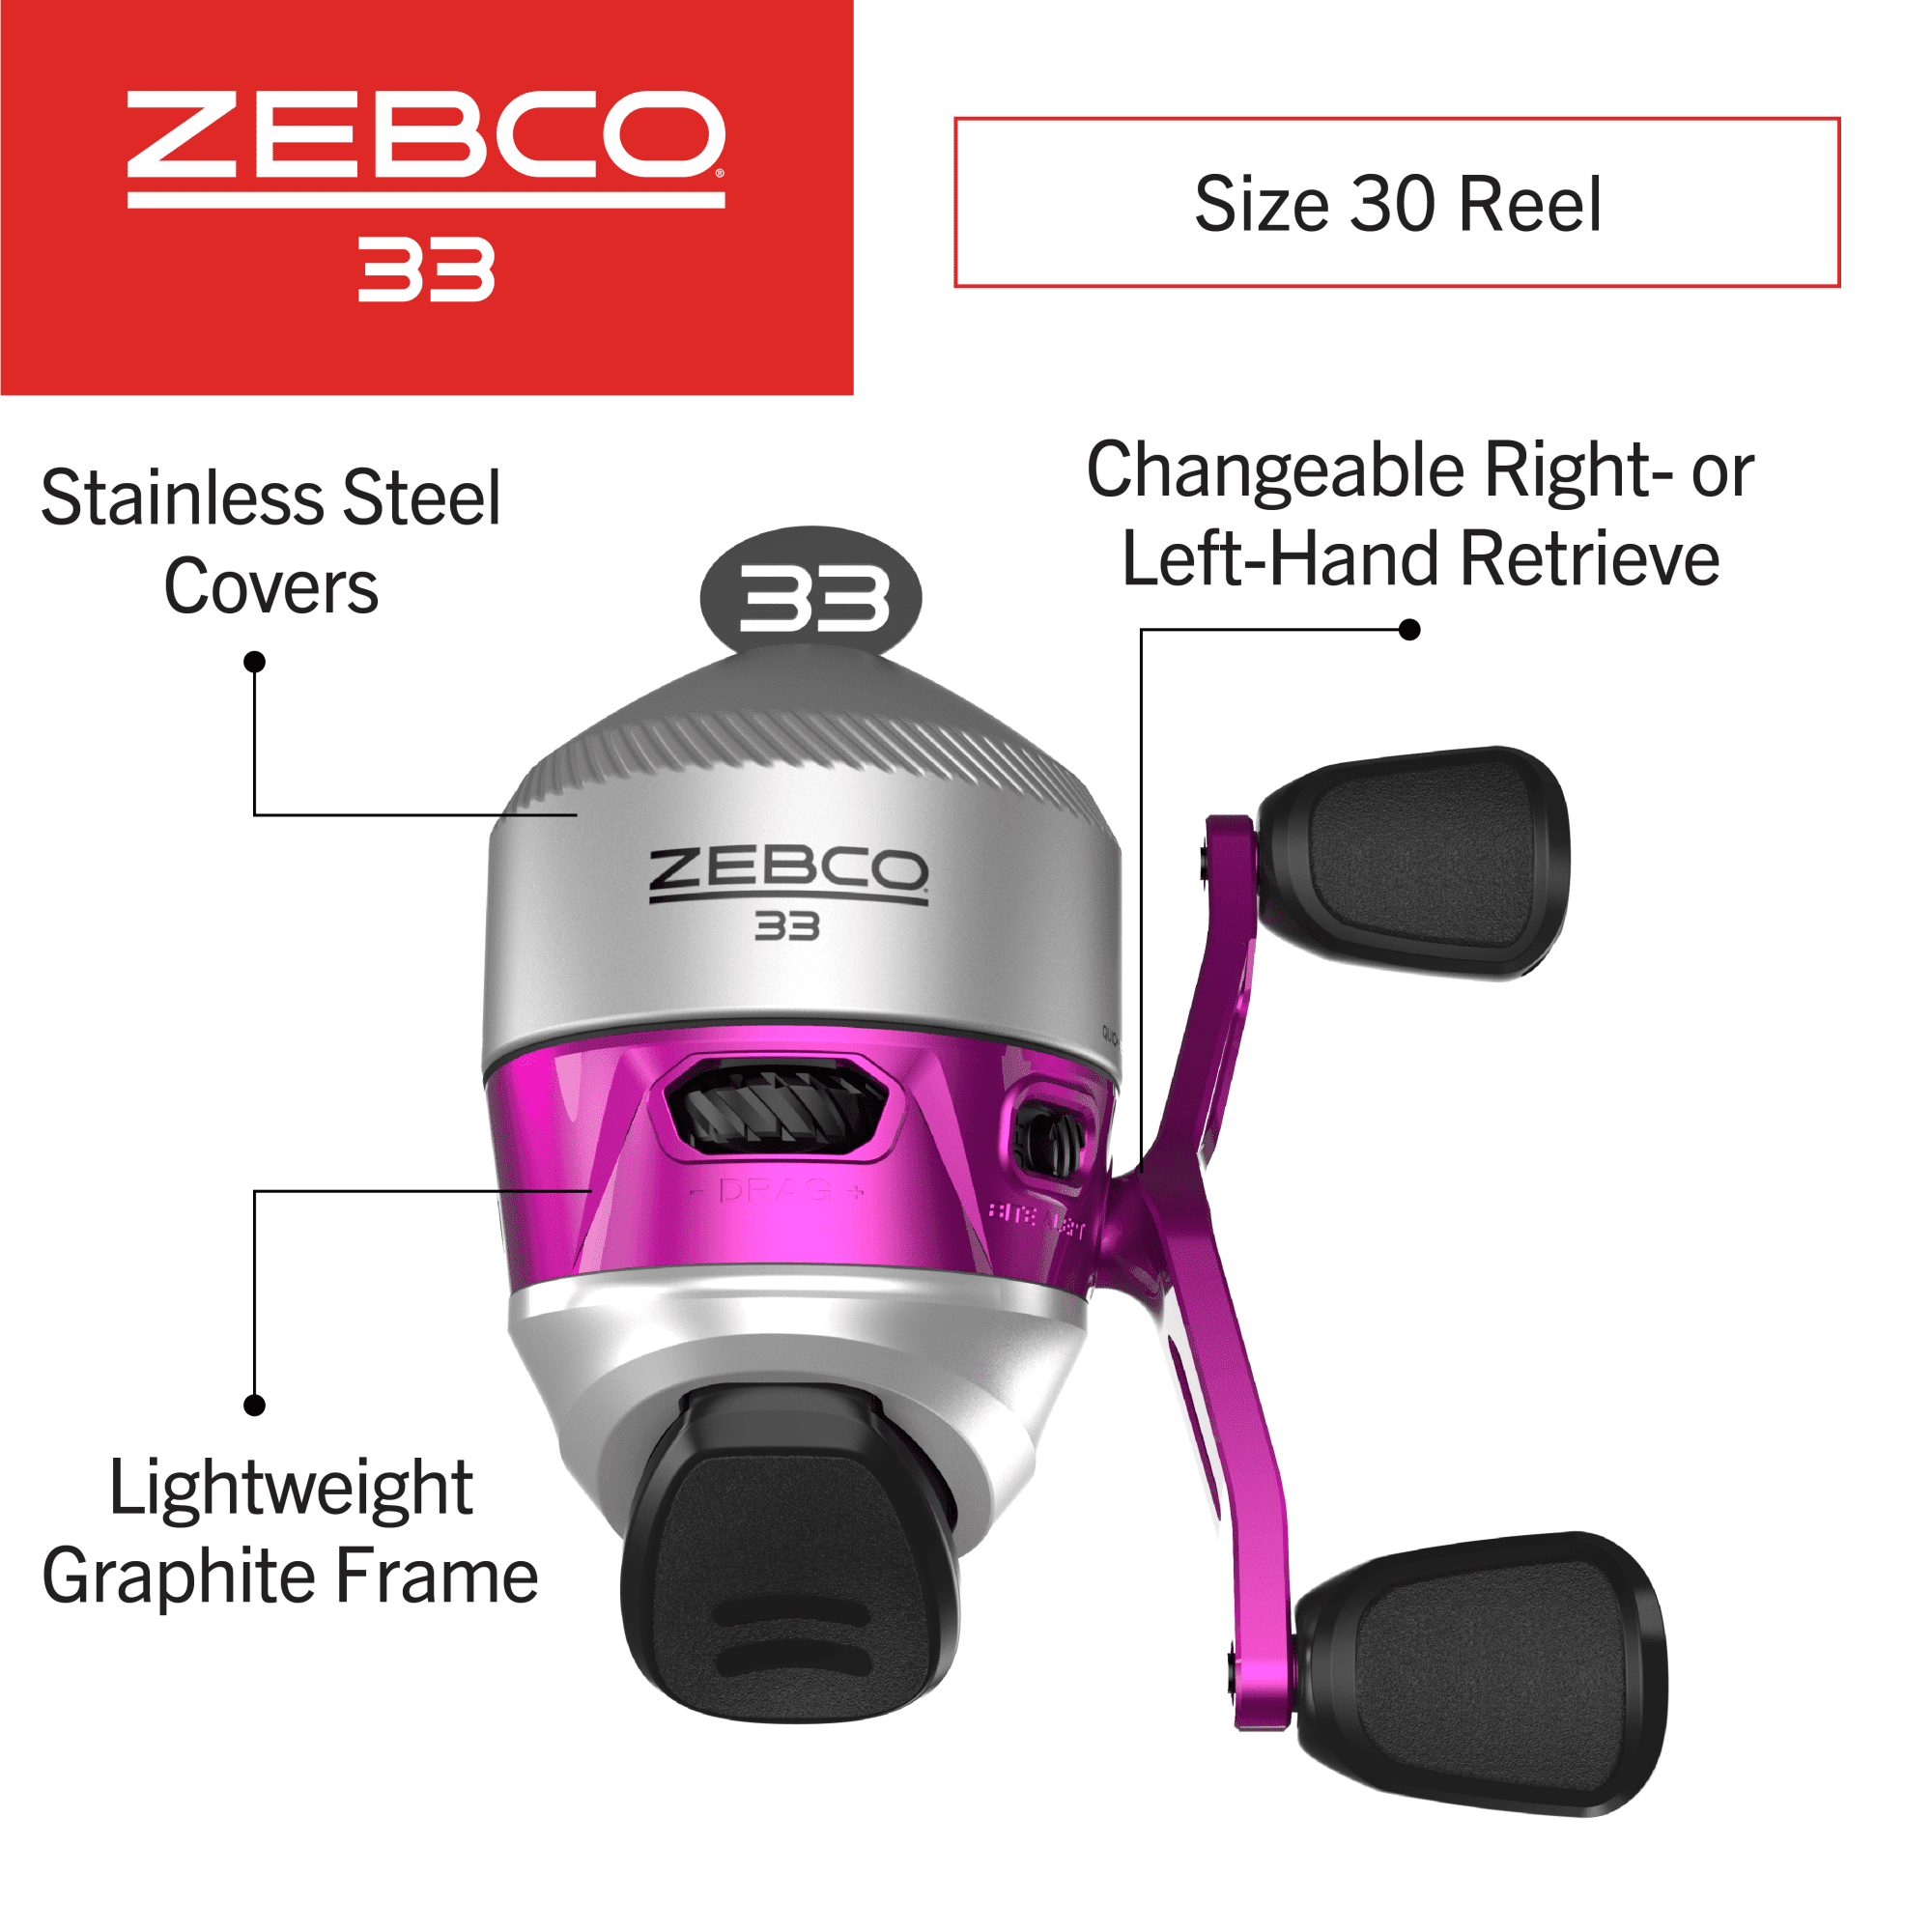 Zebco 33 Spincast Fishing Reel, Size 30 Reel, Changeable Right